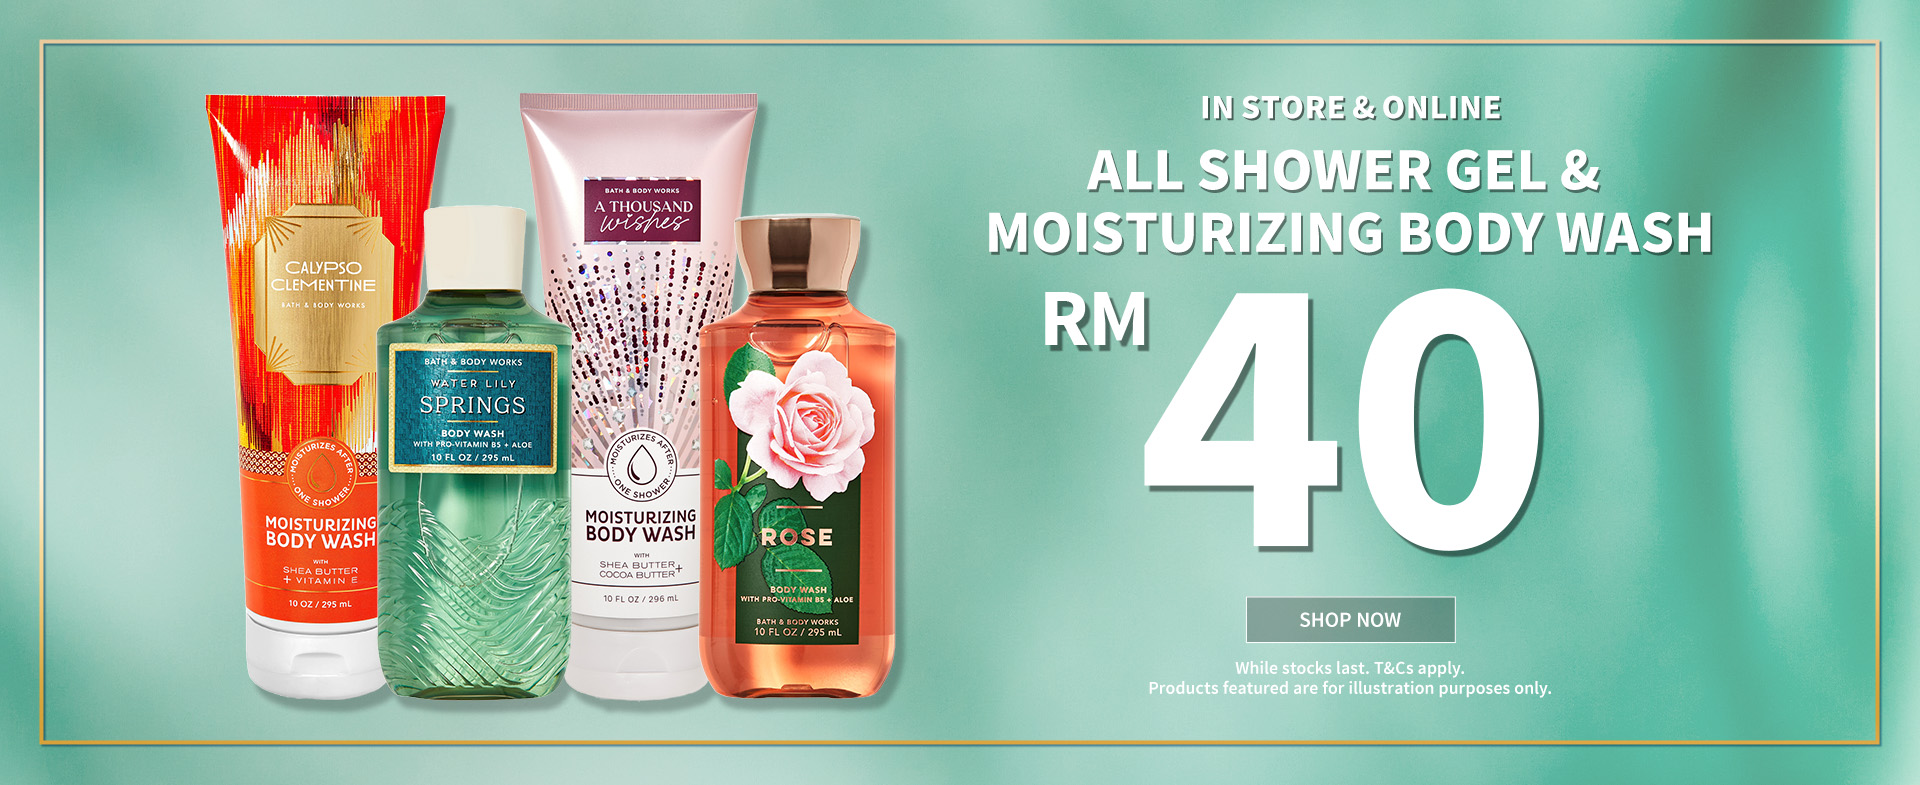 STORE and ONLINE ALL SHOWER GEL and MOISTURIZING BODY WASH $